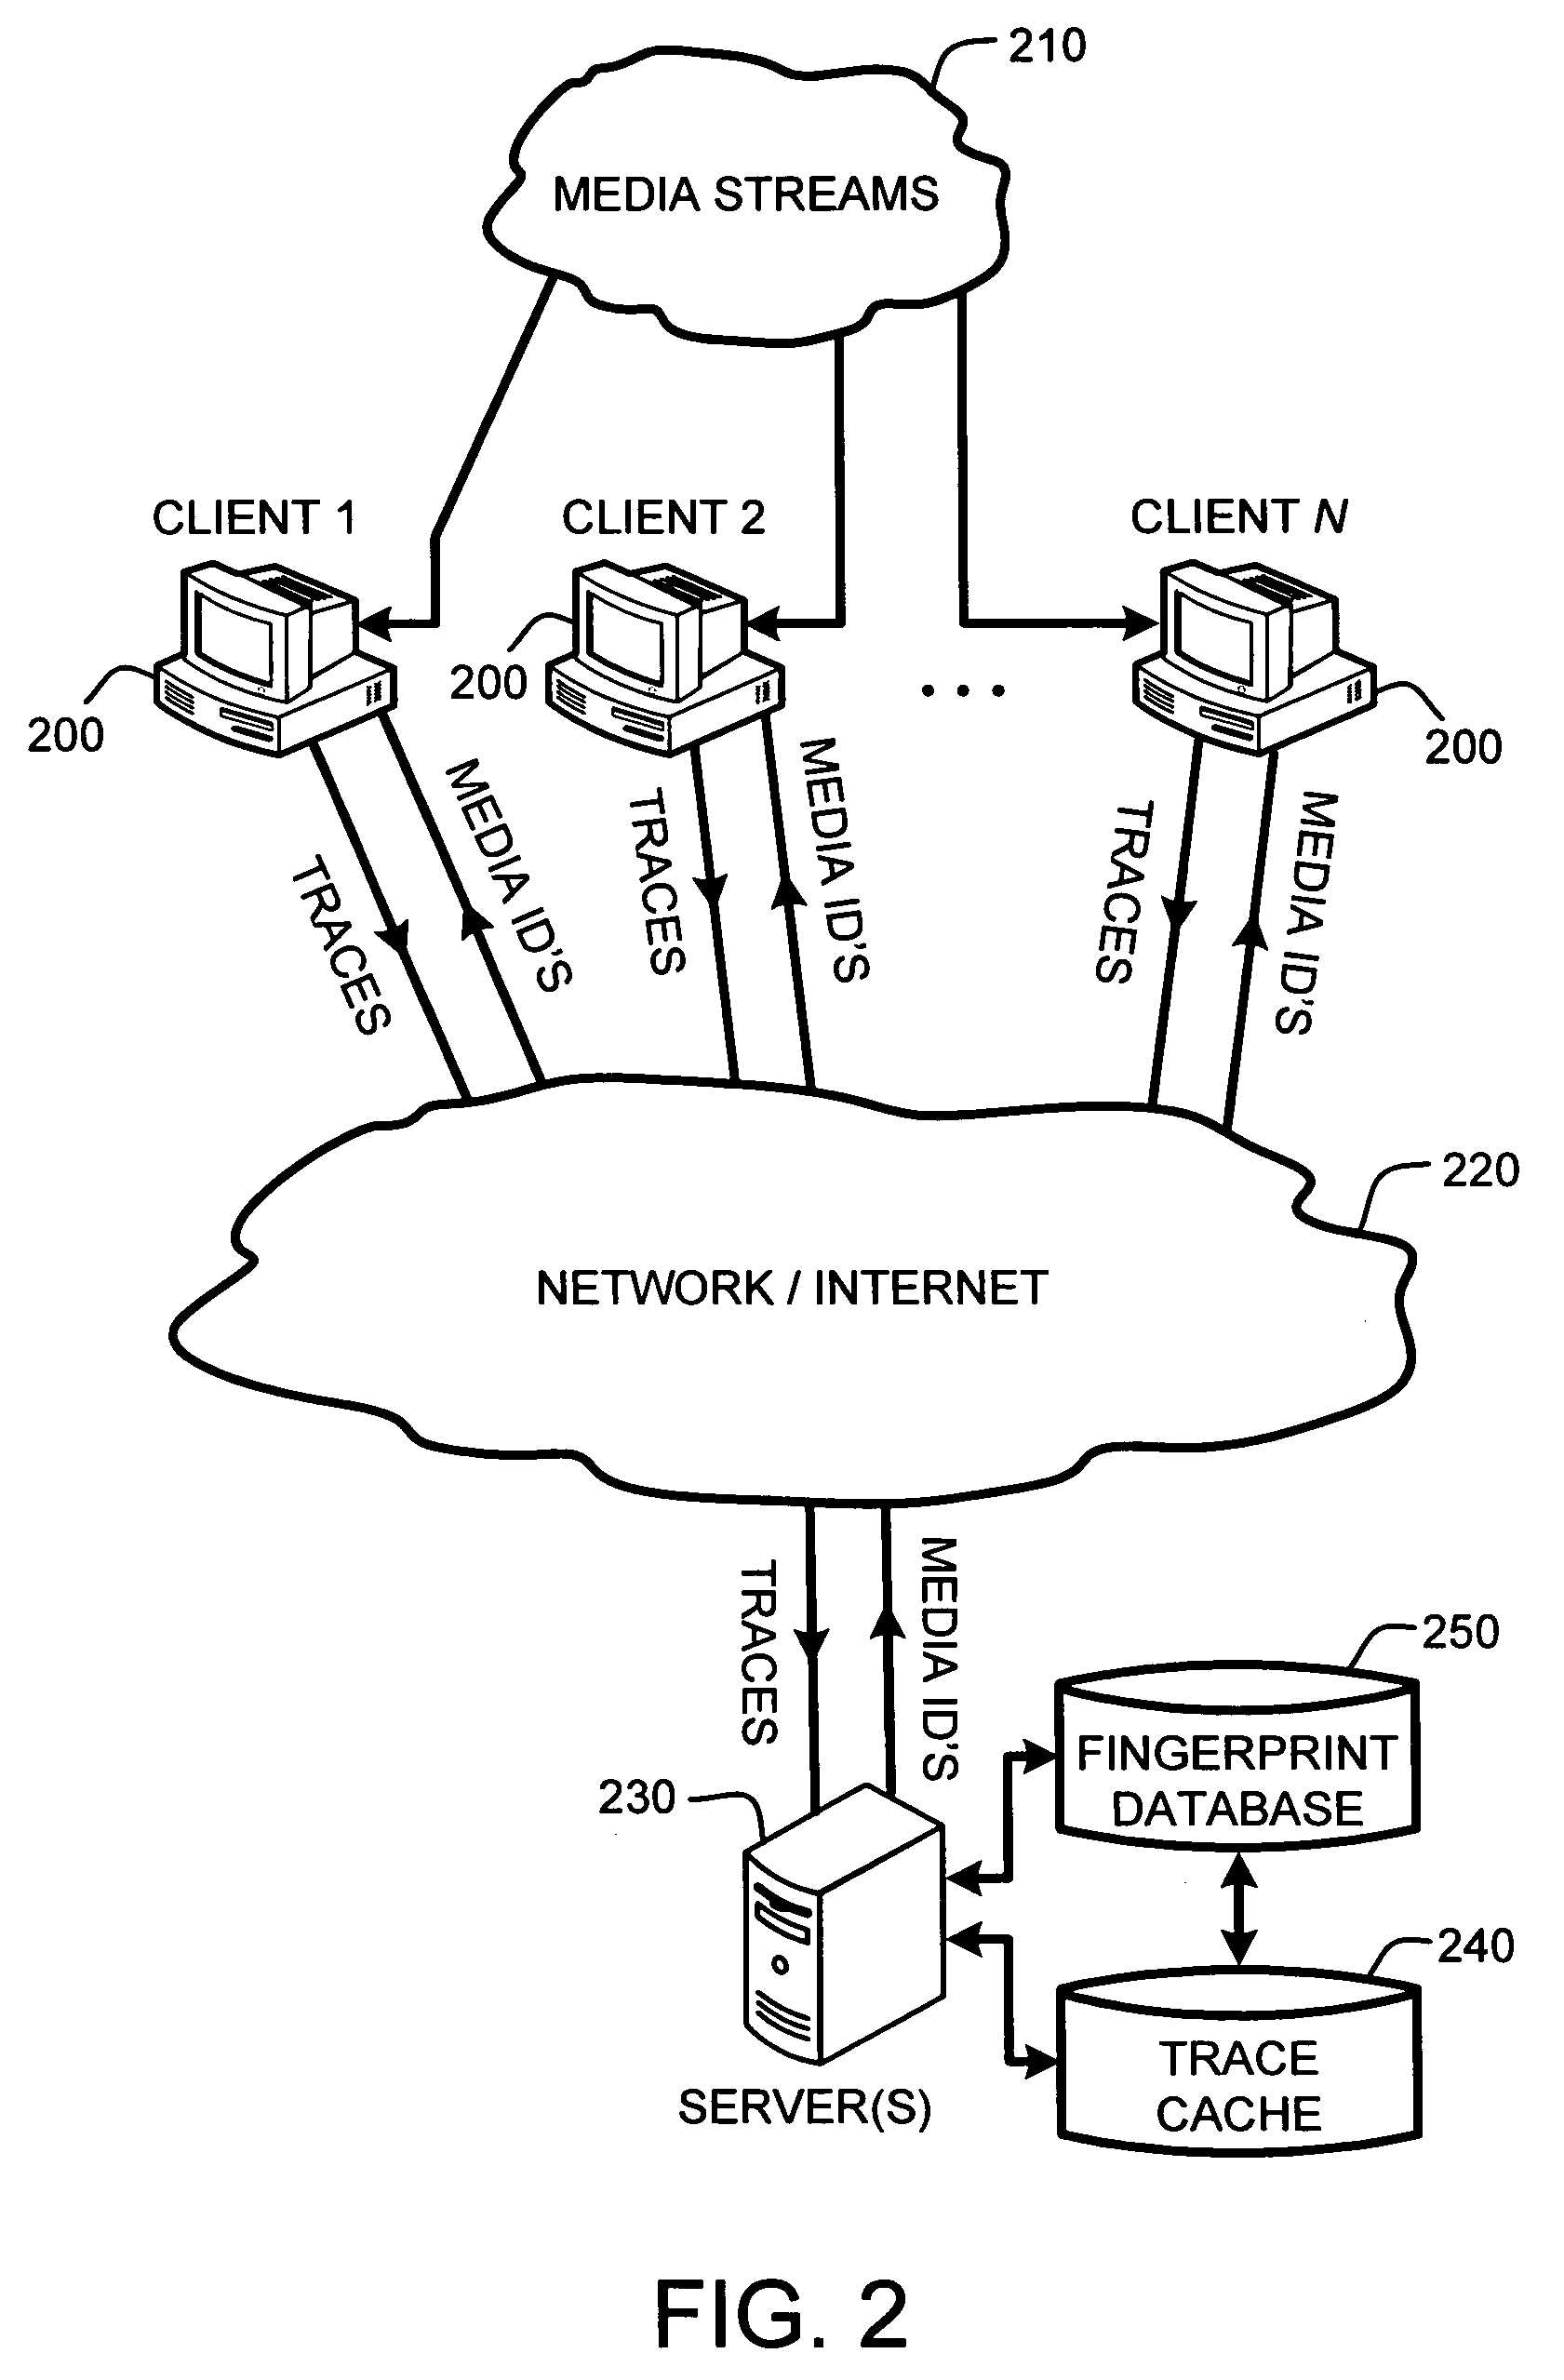 System and method for speeding up database lookups for multiple synchronized data streams